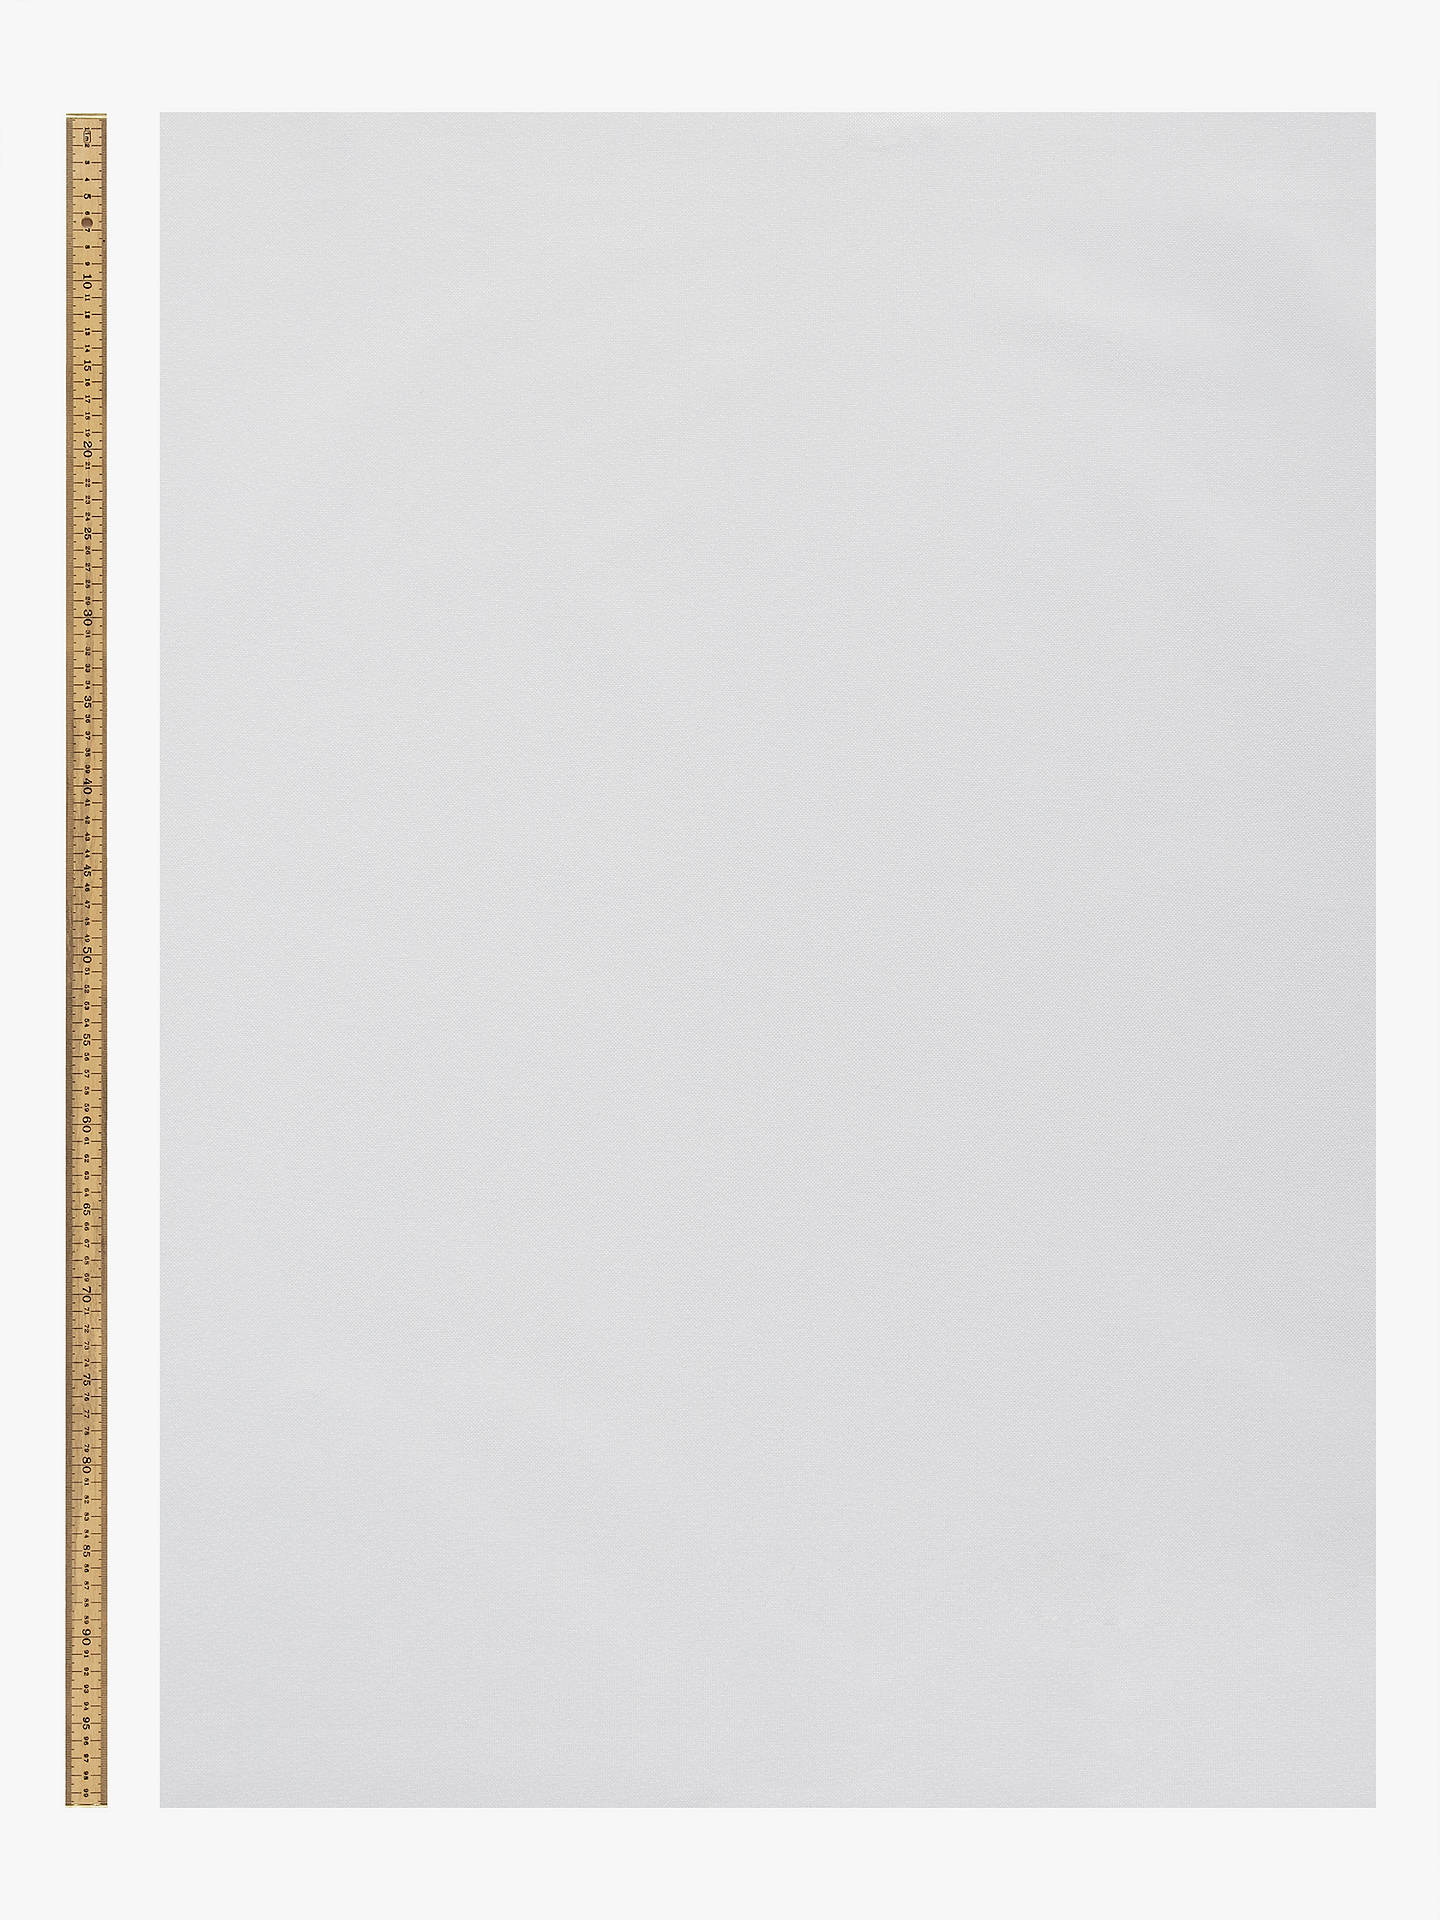 John Lewis Ancona Made to Measure Blackout Roller Blind, Morning Frost